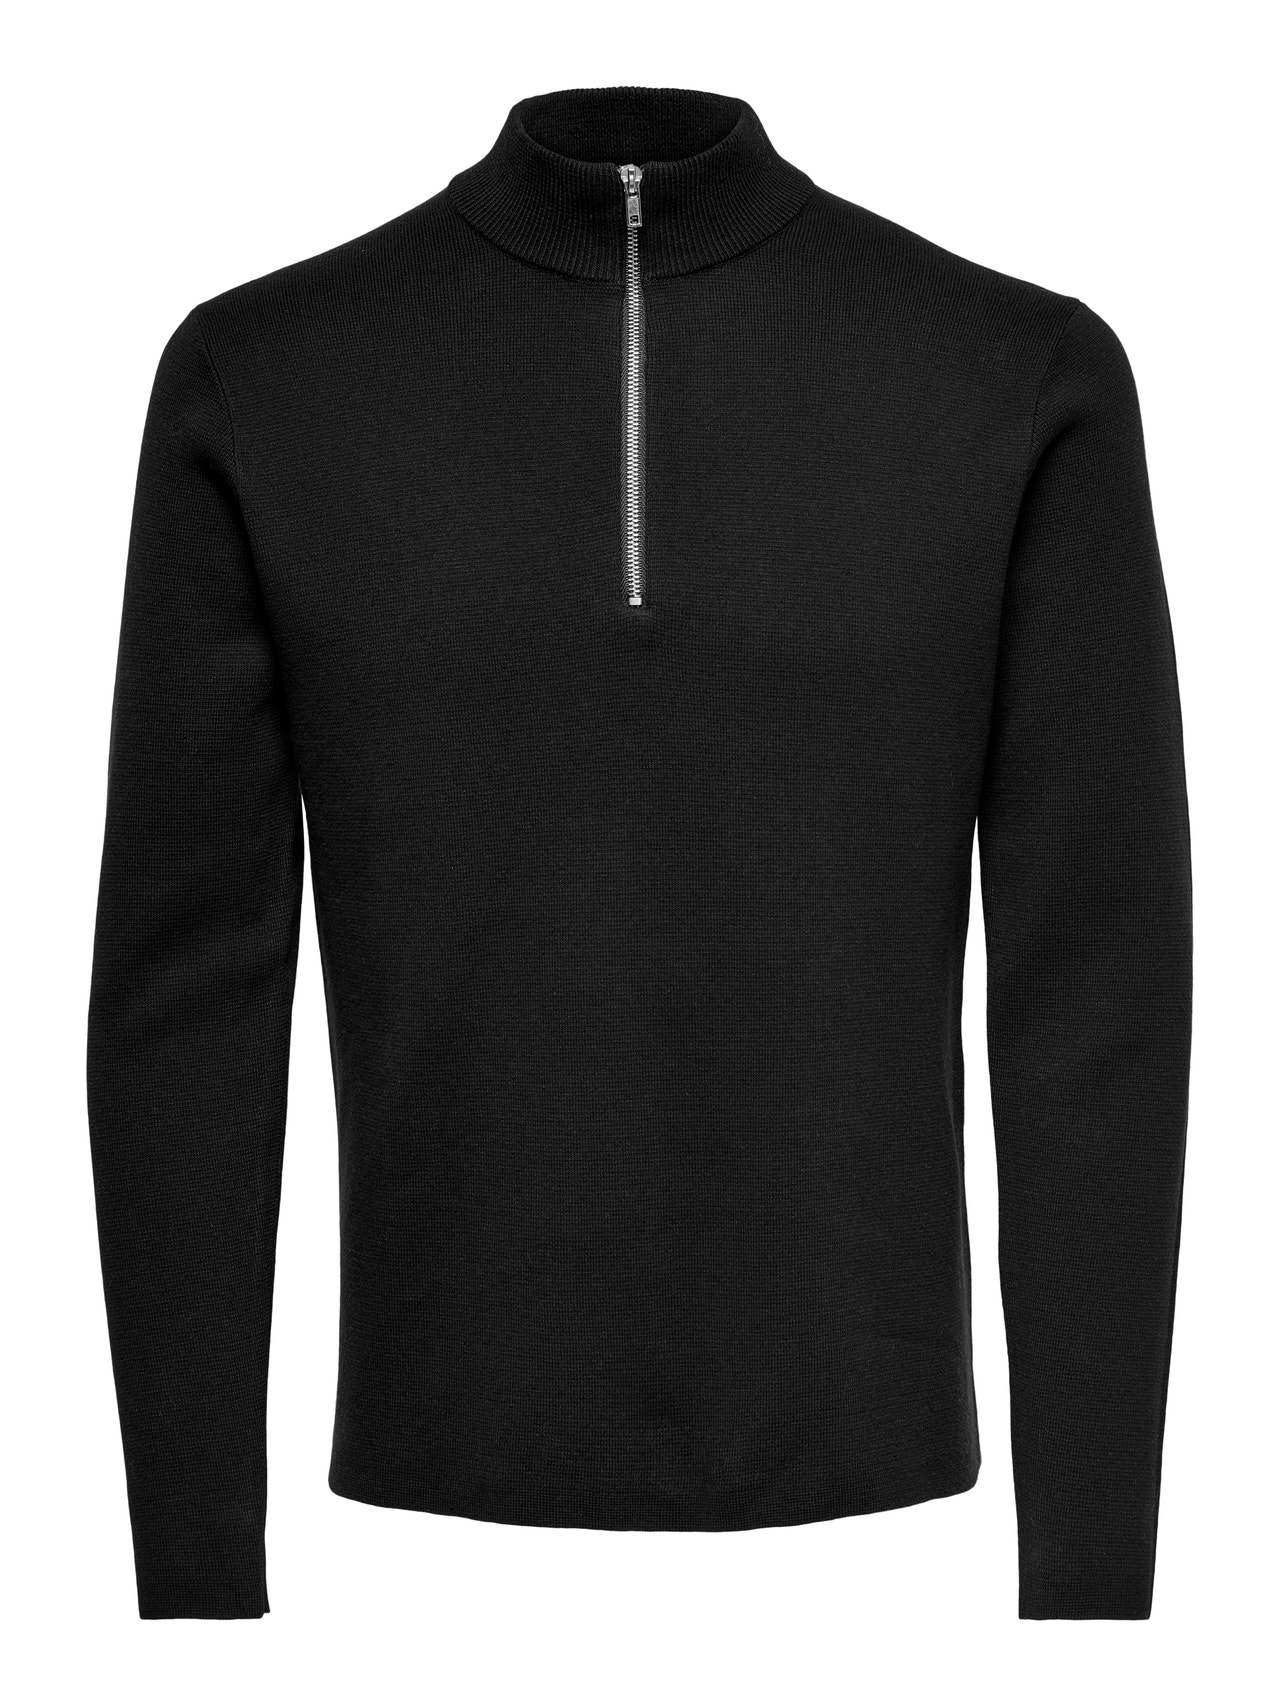 ONLY & SONS Round Neck Pullover -Black - 22020570